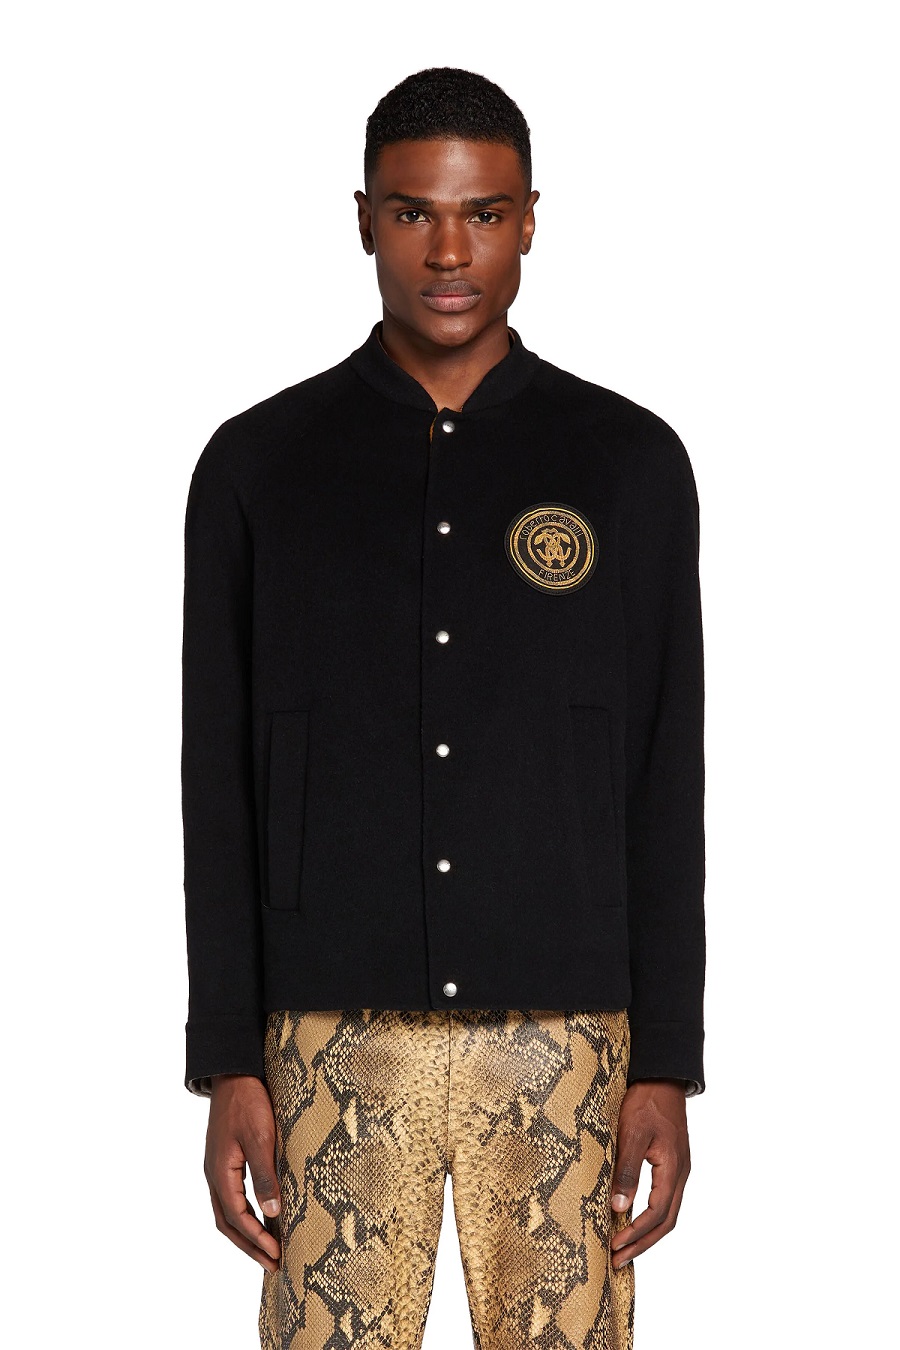 Roberto Cavalli Black Nappa Lucky Symbol Embroidered Bomber Jacket, Brand Size 46 (US Size 36) in Black